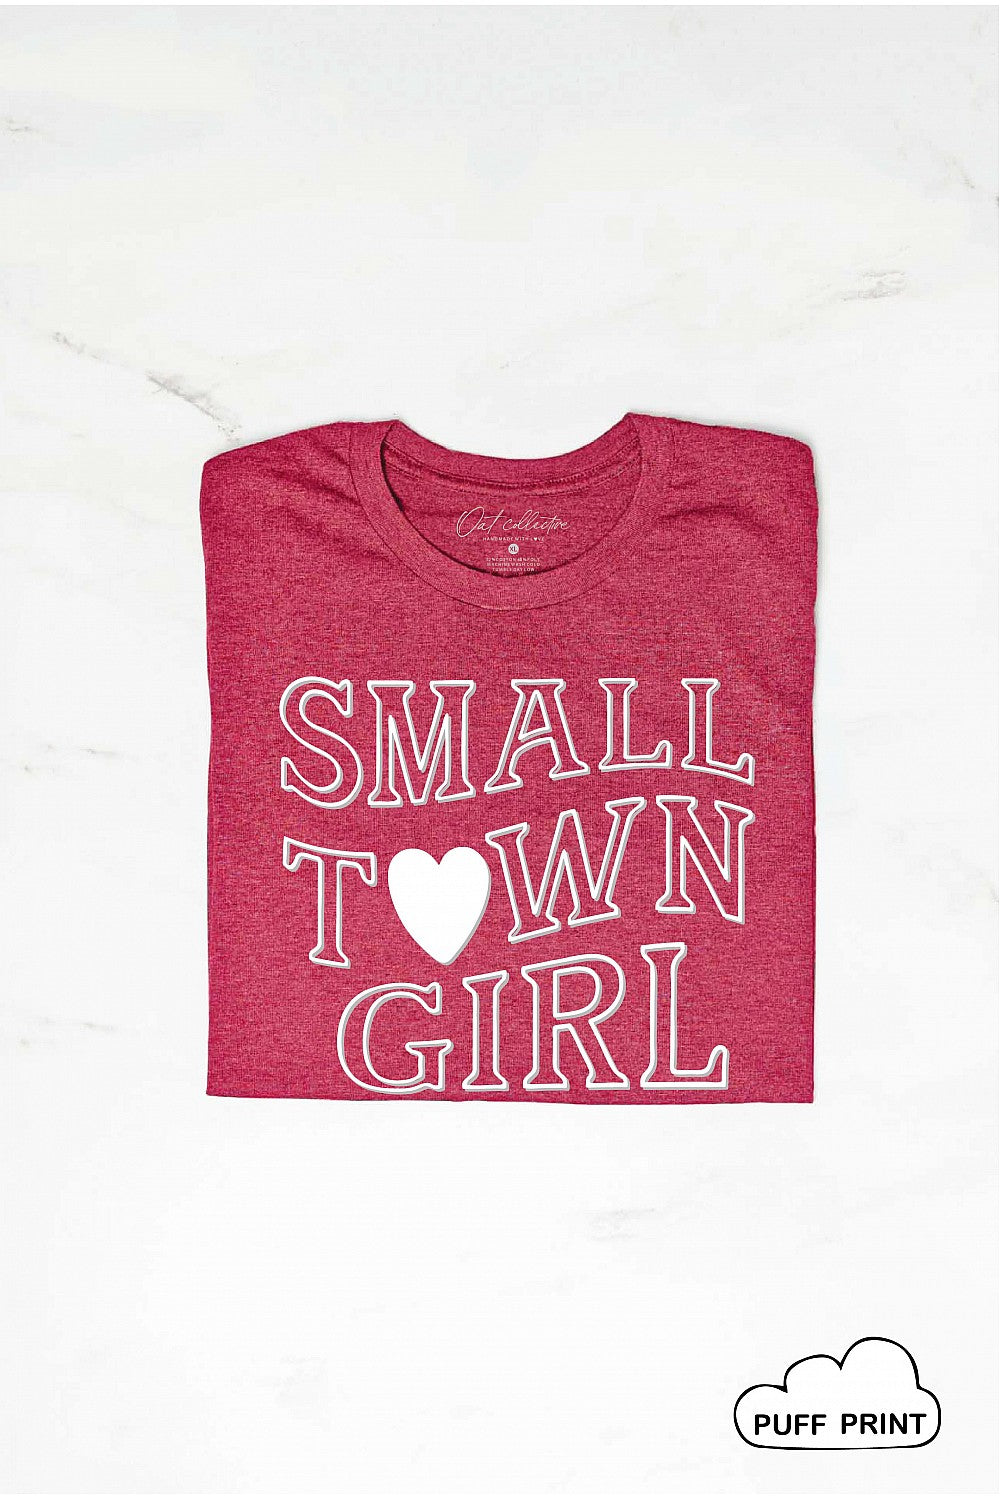 Small Town Girl Puff Print Graphic Tee